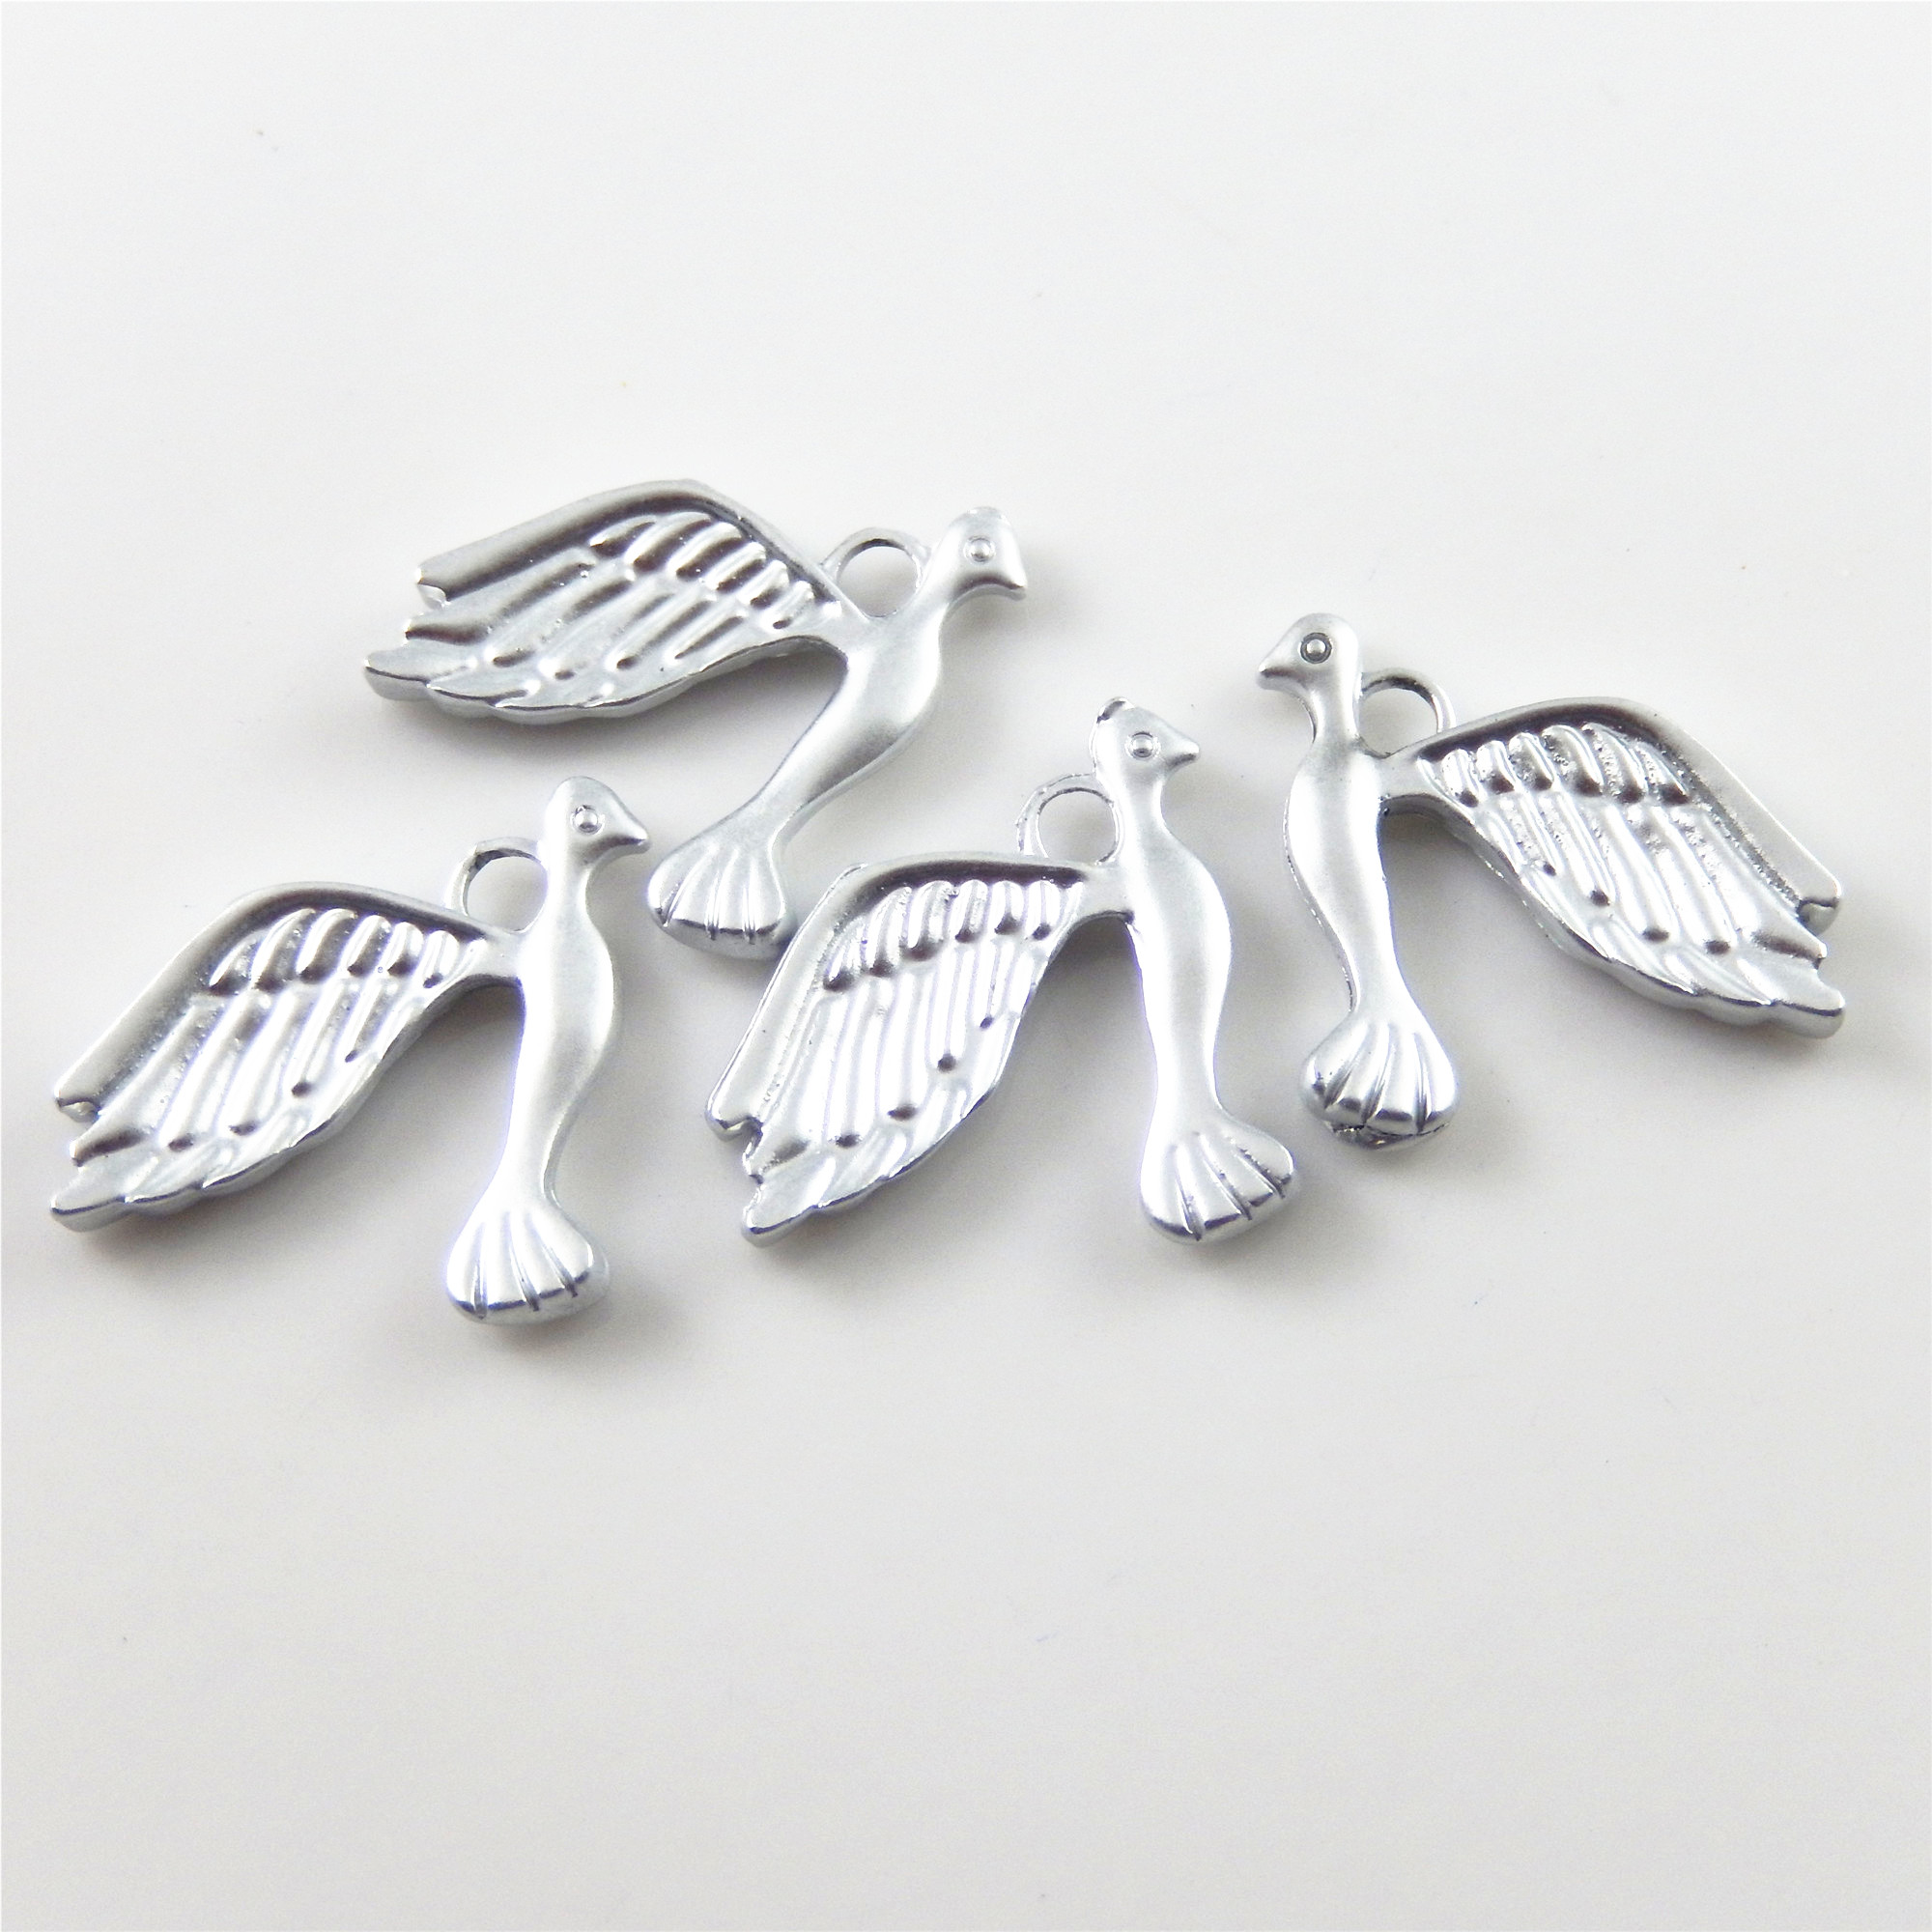 Silver Color Enamel Alloy Flying Pigeon Jewelry Charms Pendants 9pcs ...